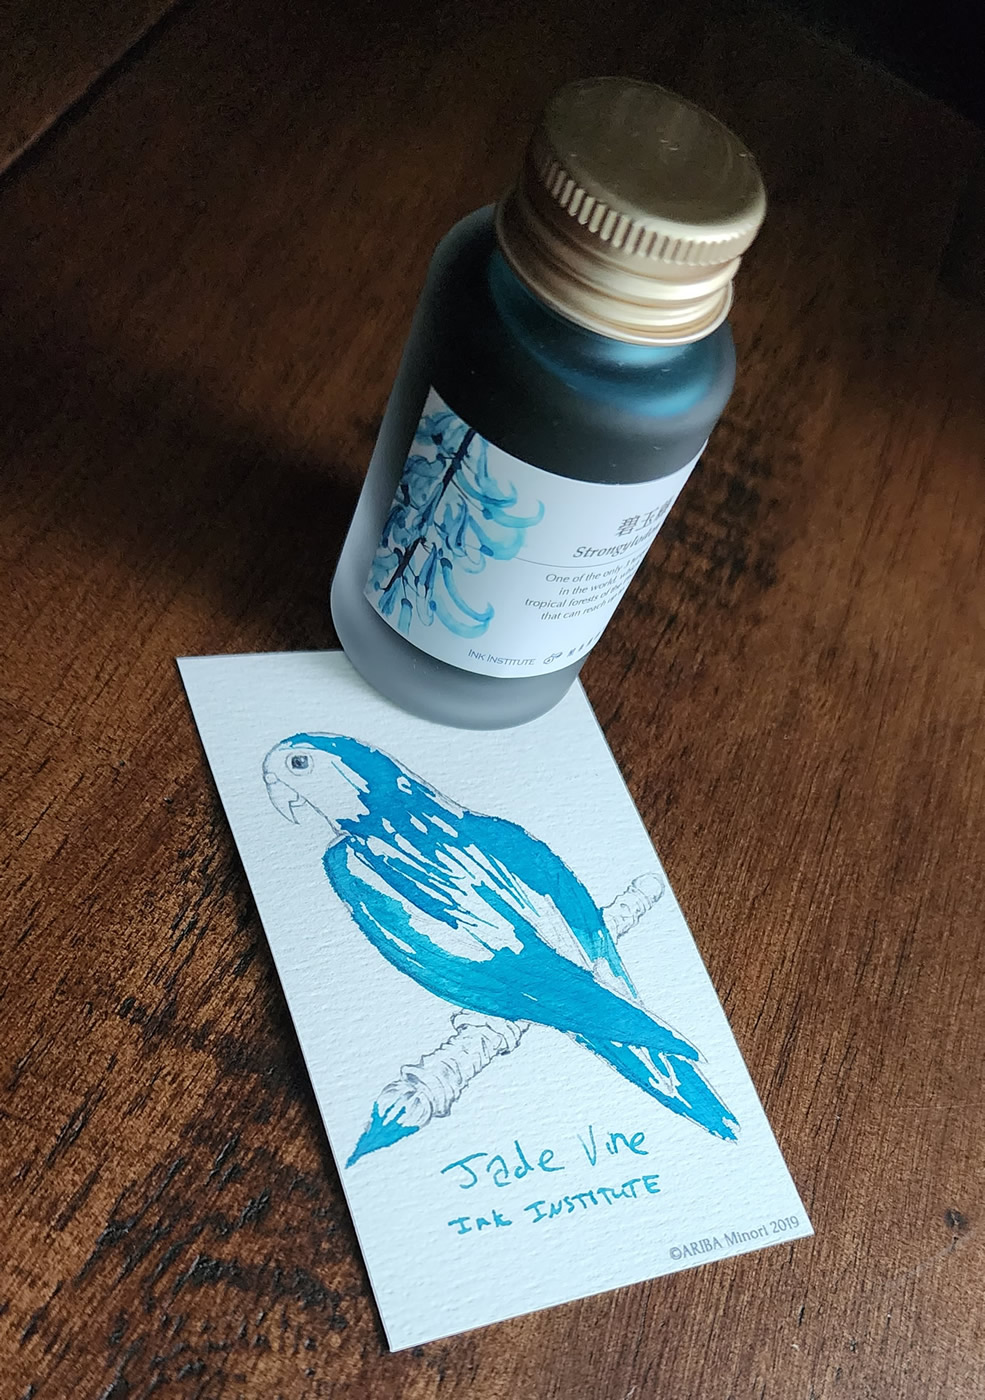 A bottle of Jade Vine ink next to a small ink swatch card with a sketch of a bird holding a glass dip pen in its claws and bright teal ink highlighting the feathers.